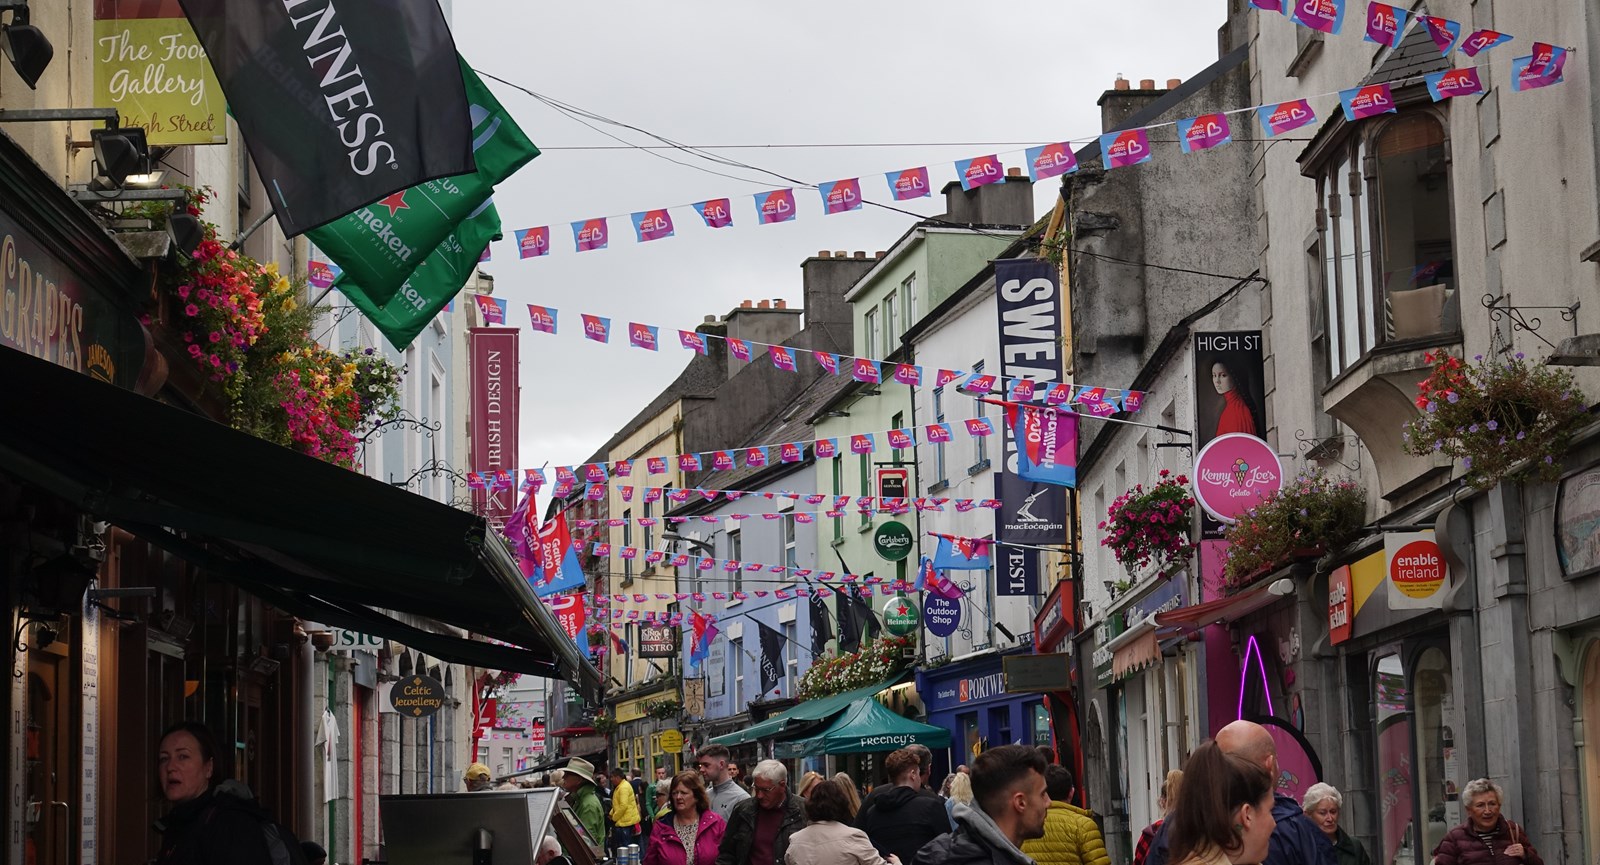 Small street in Ireland with Galway logo